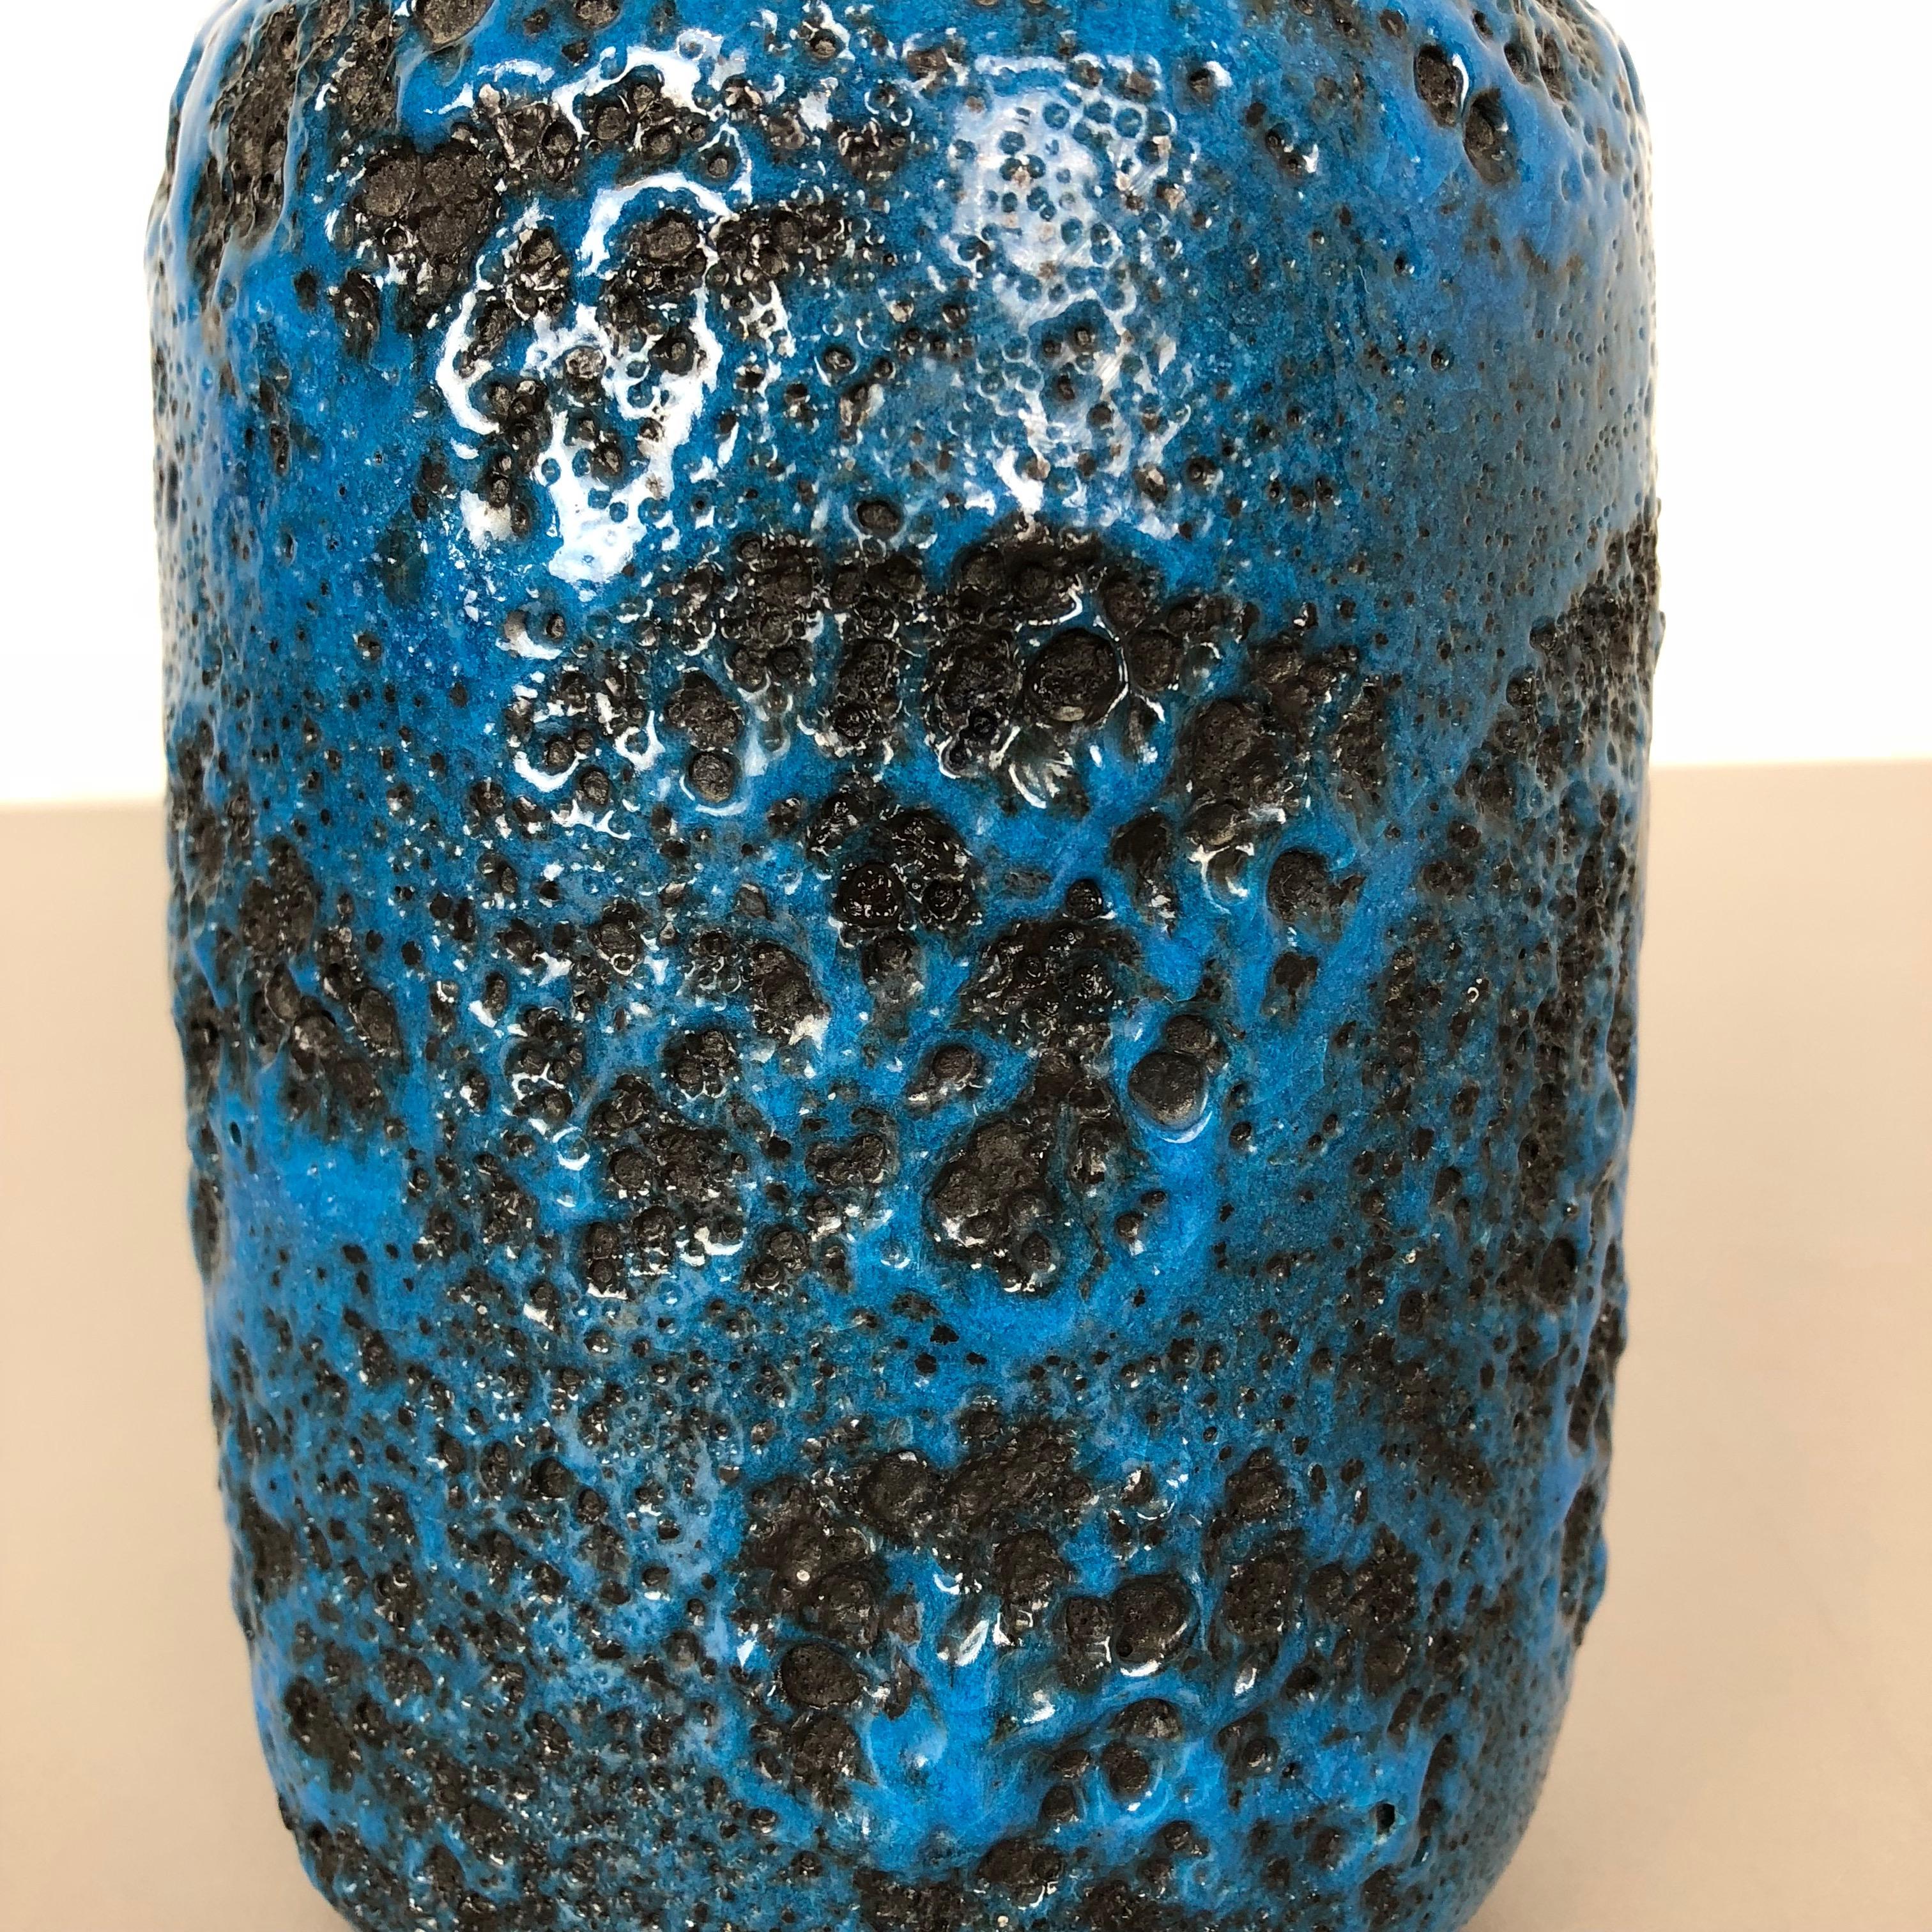 Super Colorful Fat Lava Pottery Vase by Gräflich Ortenburg, Germany, 1950s For Sale 6